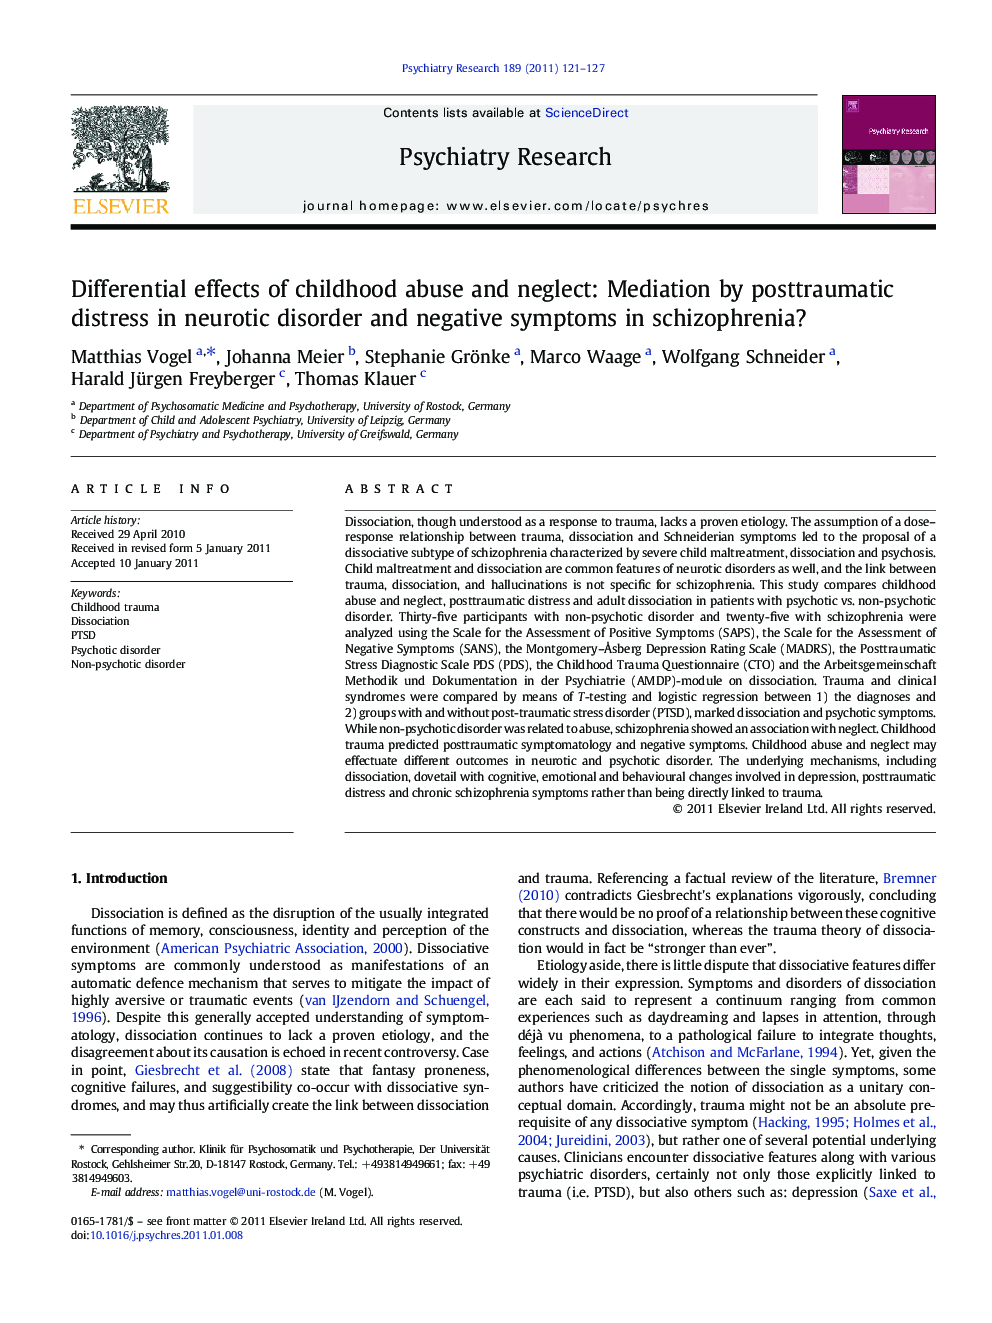 Differential effects of childhood abuse and neglect: Mediation by posttraumatic distress in neurotic disorder and negative symptoms in schizophrenia?